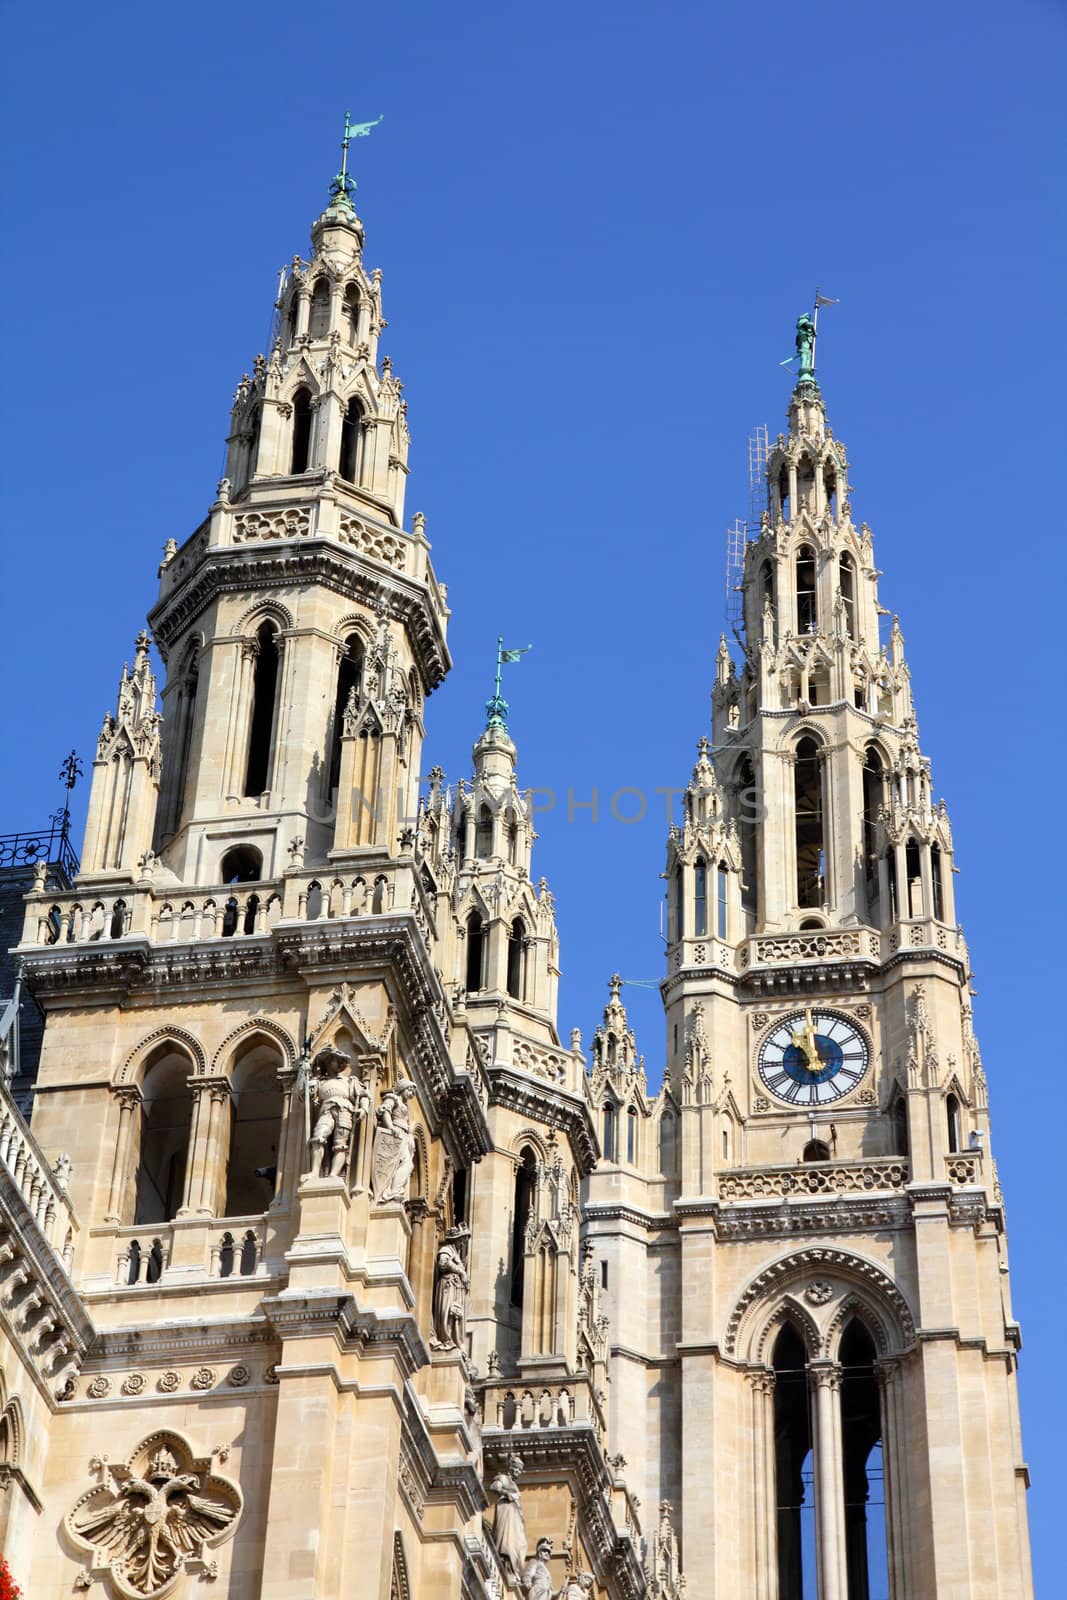 Vienna, Austria - famous City Hall building. The Old Town is a UNESCO World Heritage Site.